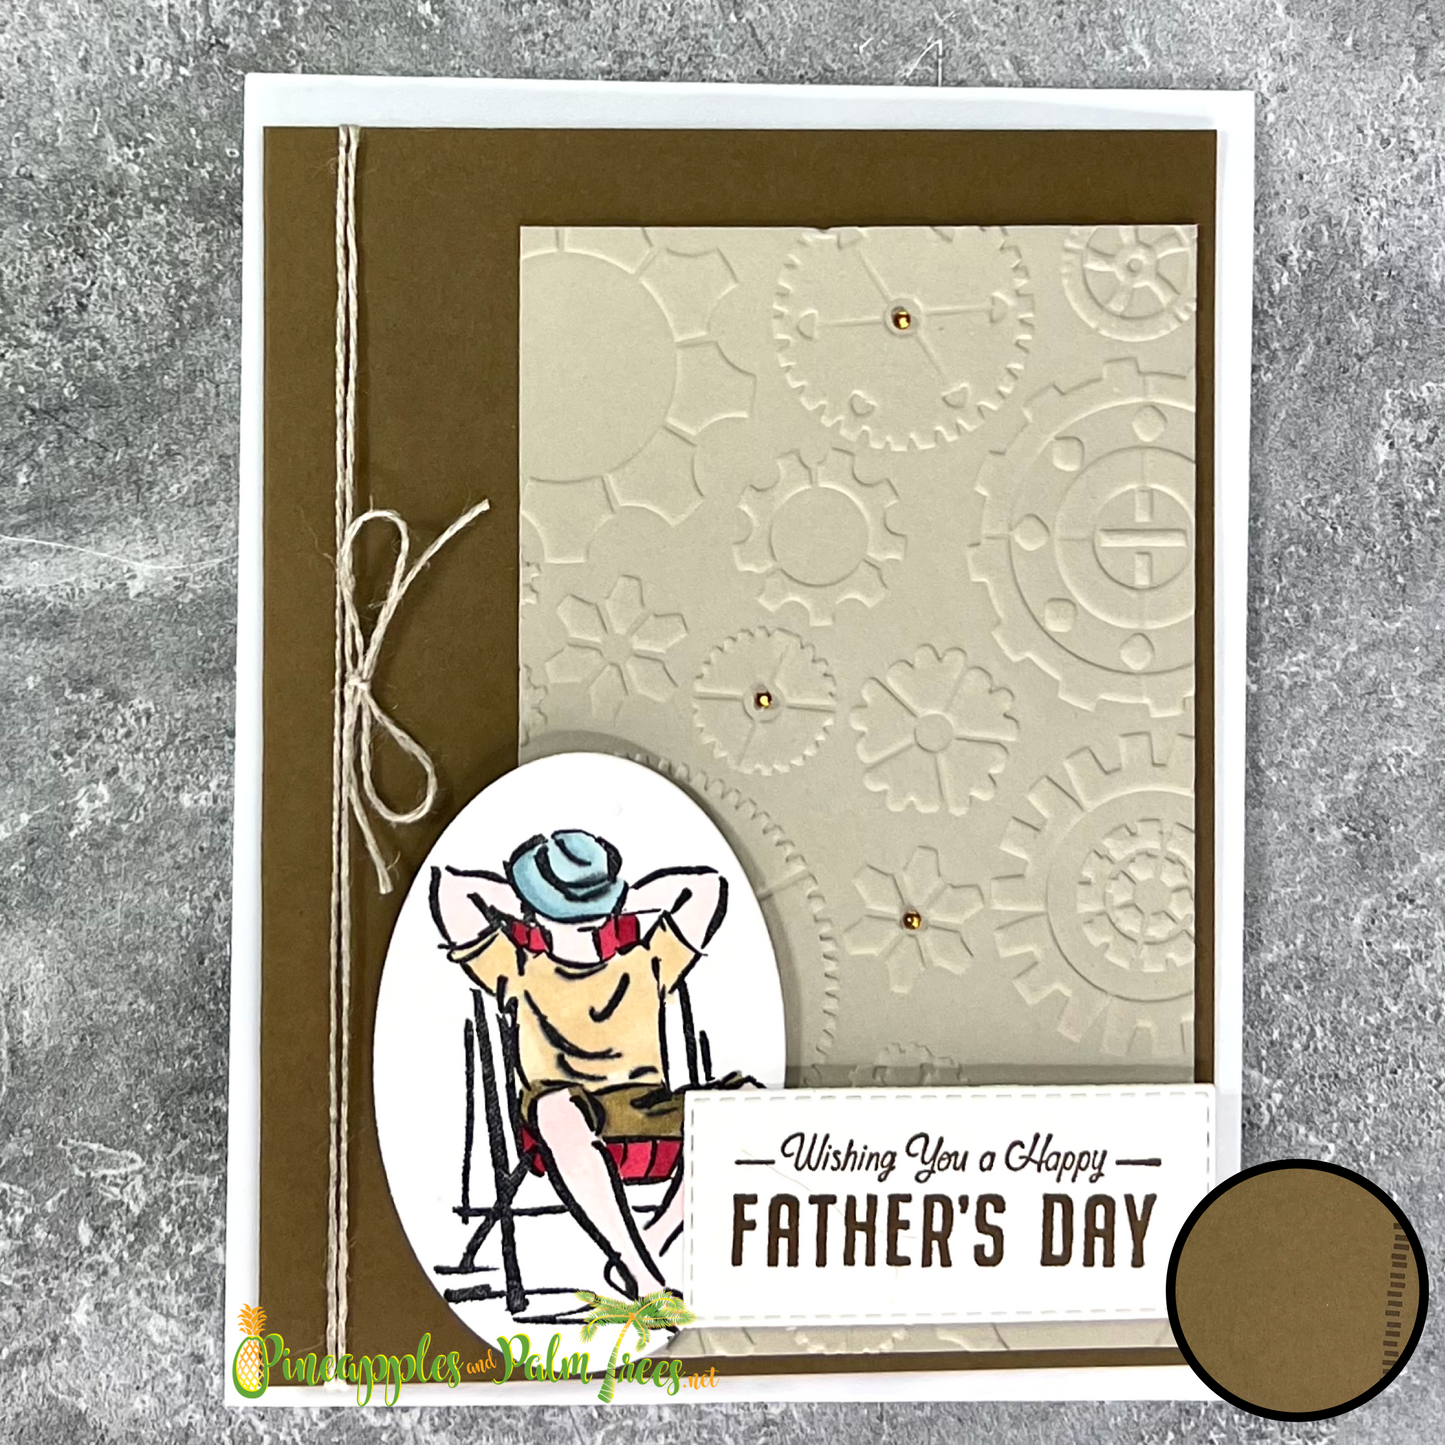 Greeting Card: Wishing You a Happy Father's Day - brown & blue